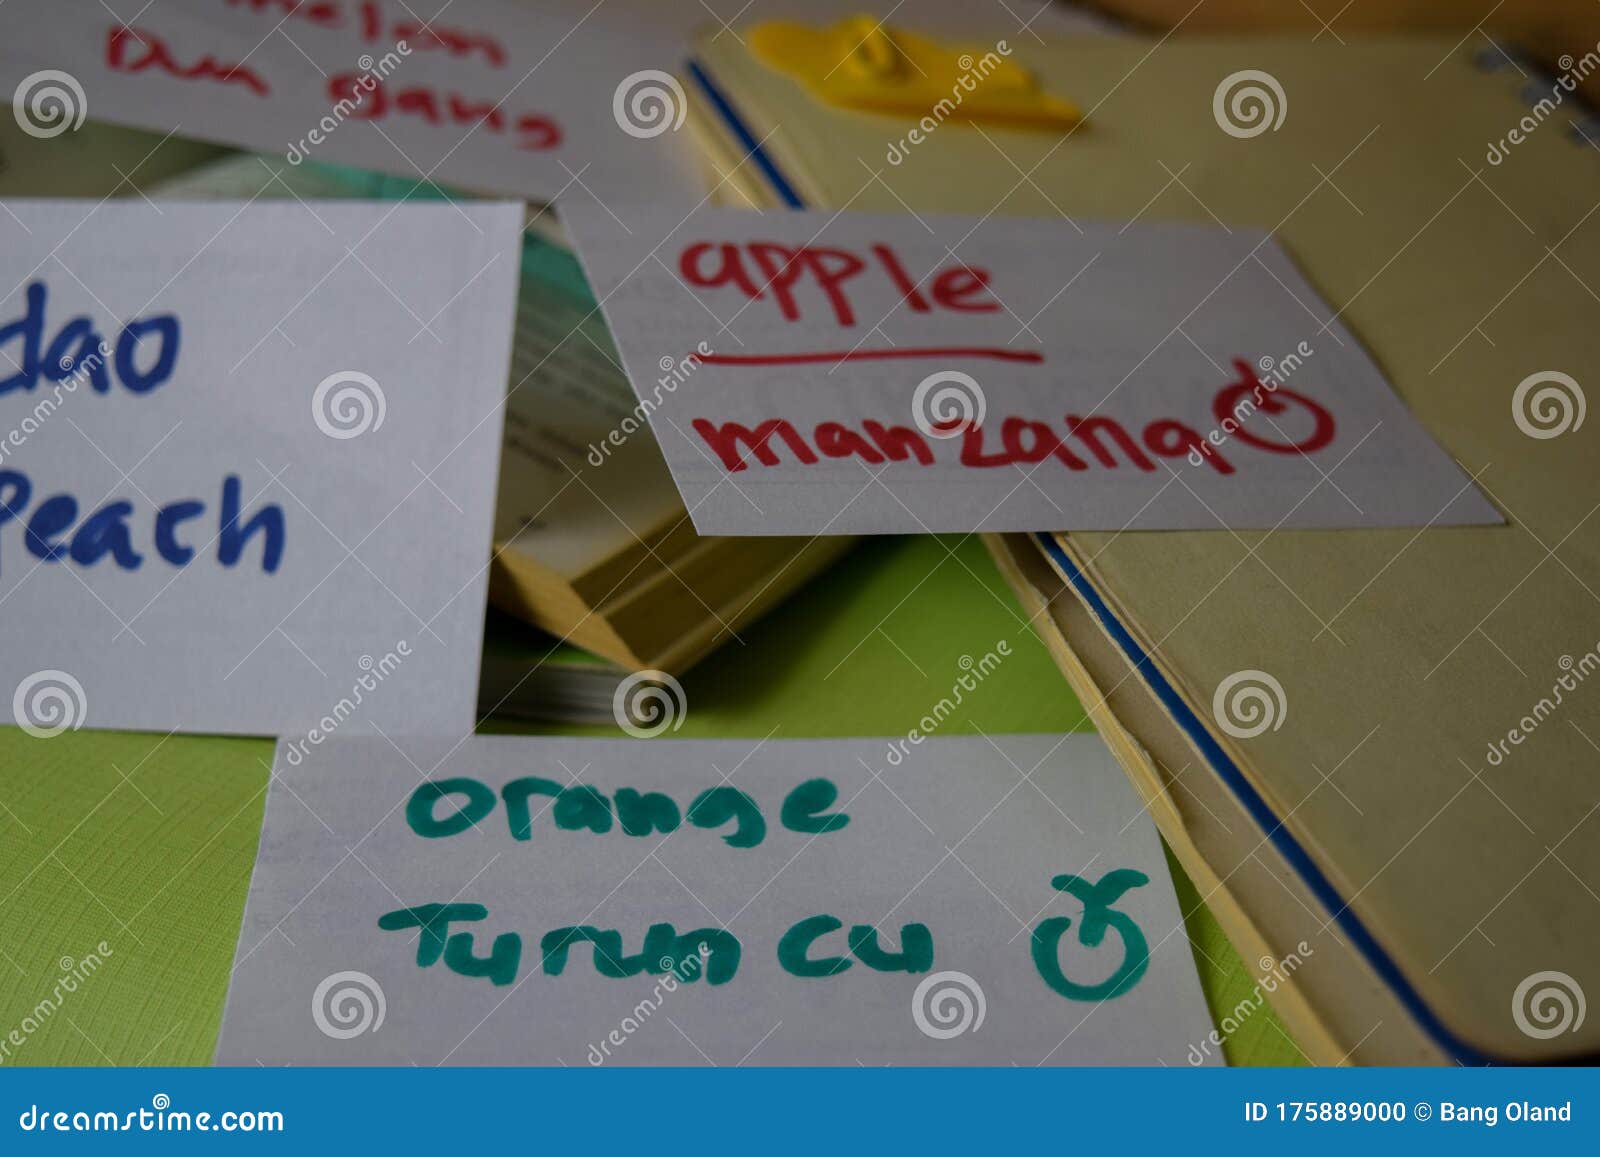 manzana write on a sticky note  on office desk. learning spanish language concept